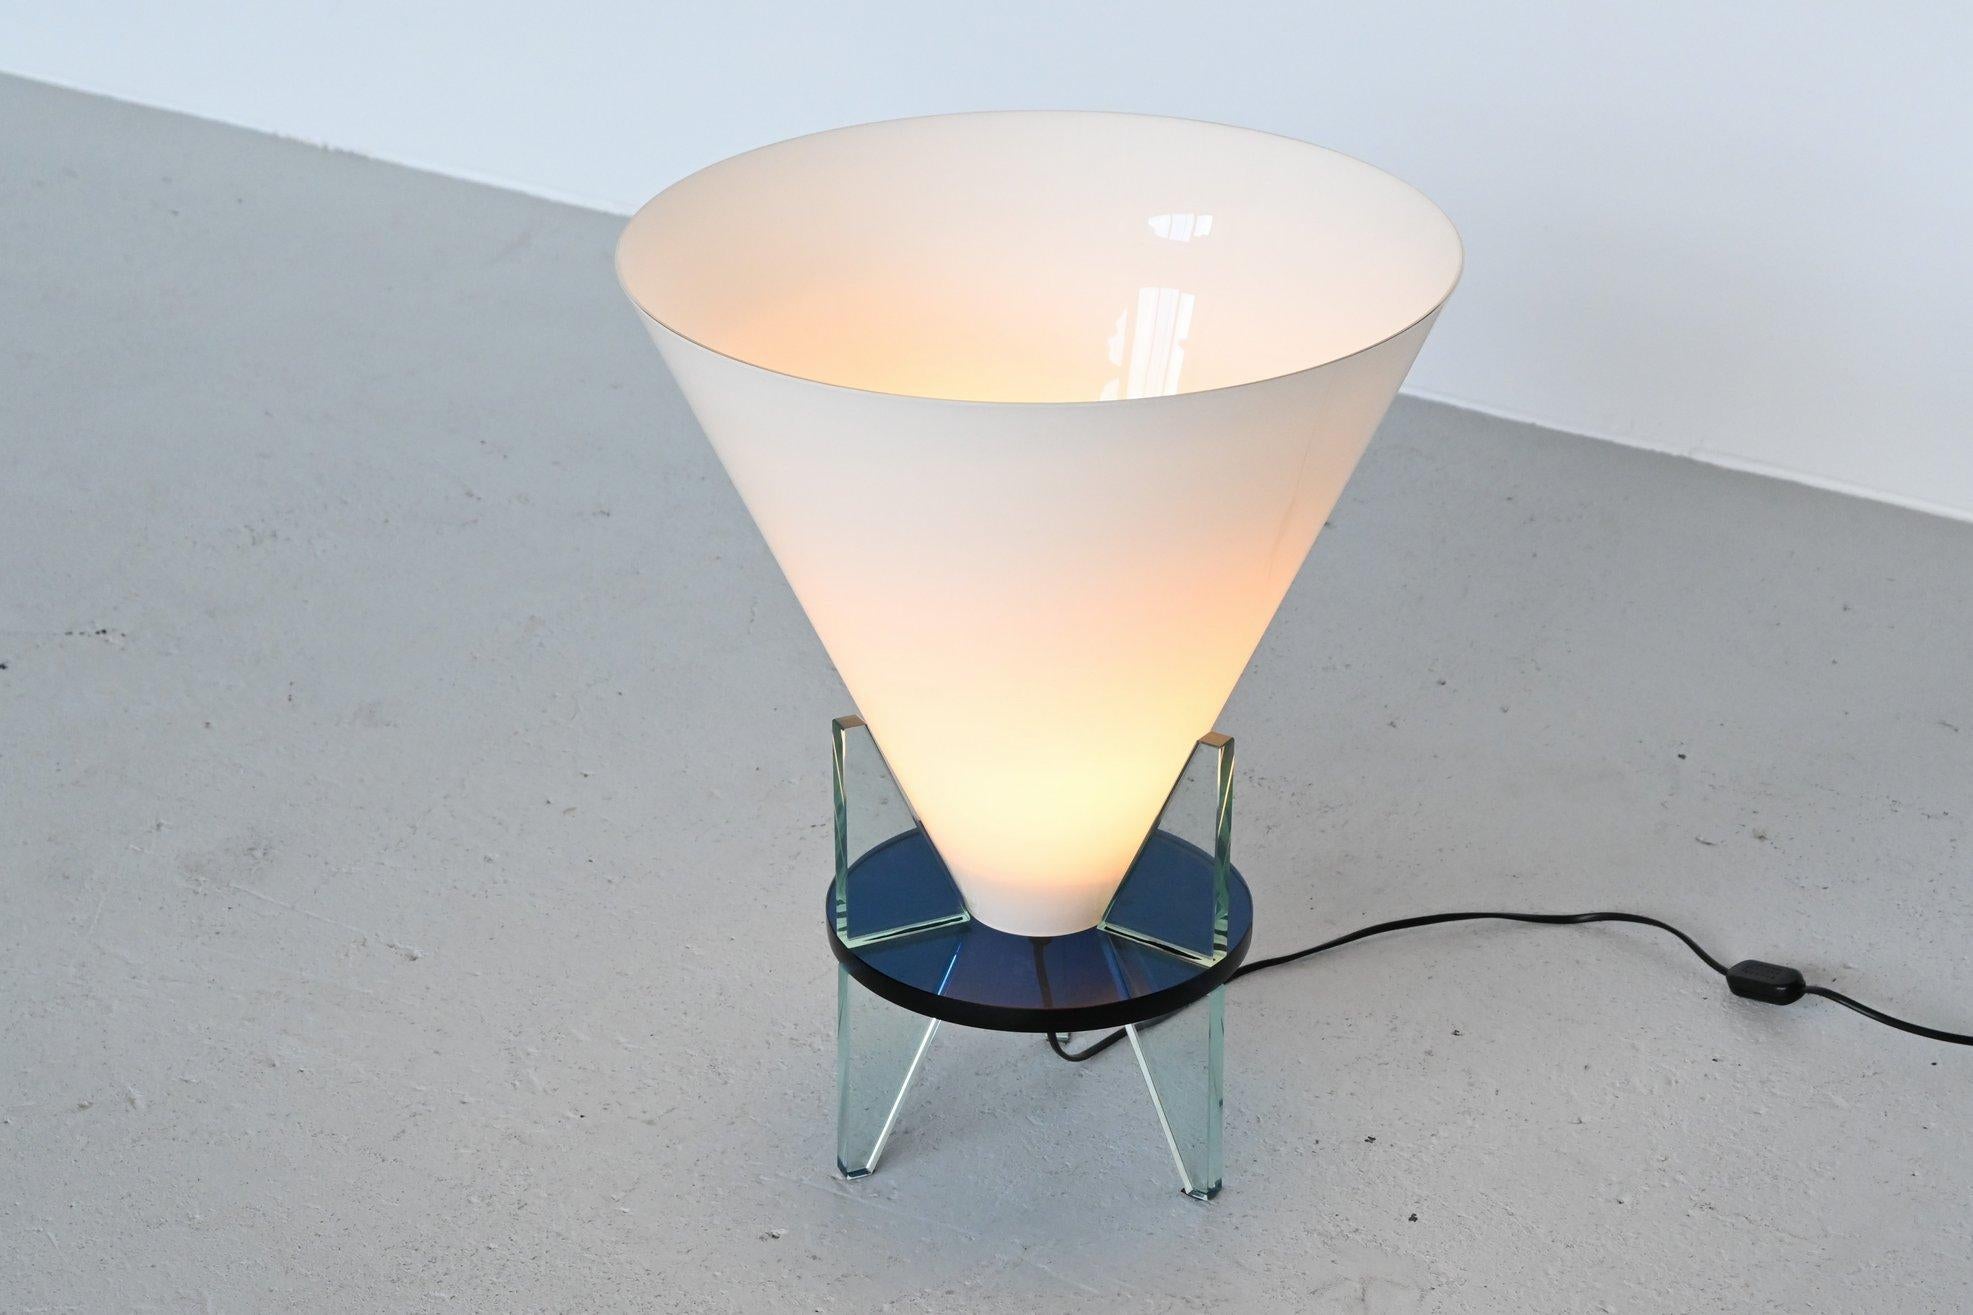 Imposing unusual table lamp model 2748 Otero designed by Rodolfo Dordoni for Fontana Arte, Italy, 1986. This lamp has a stunning shape because of the conical light diffuser. The white opaline glass inverted cone scale is resting on a round tripod